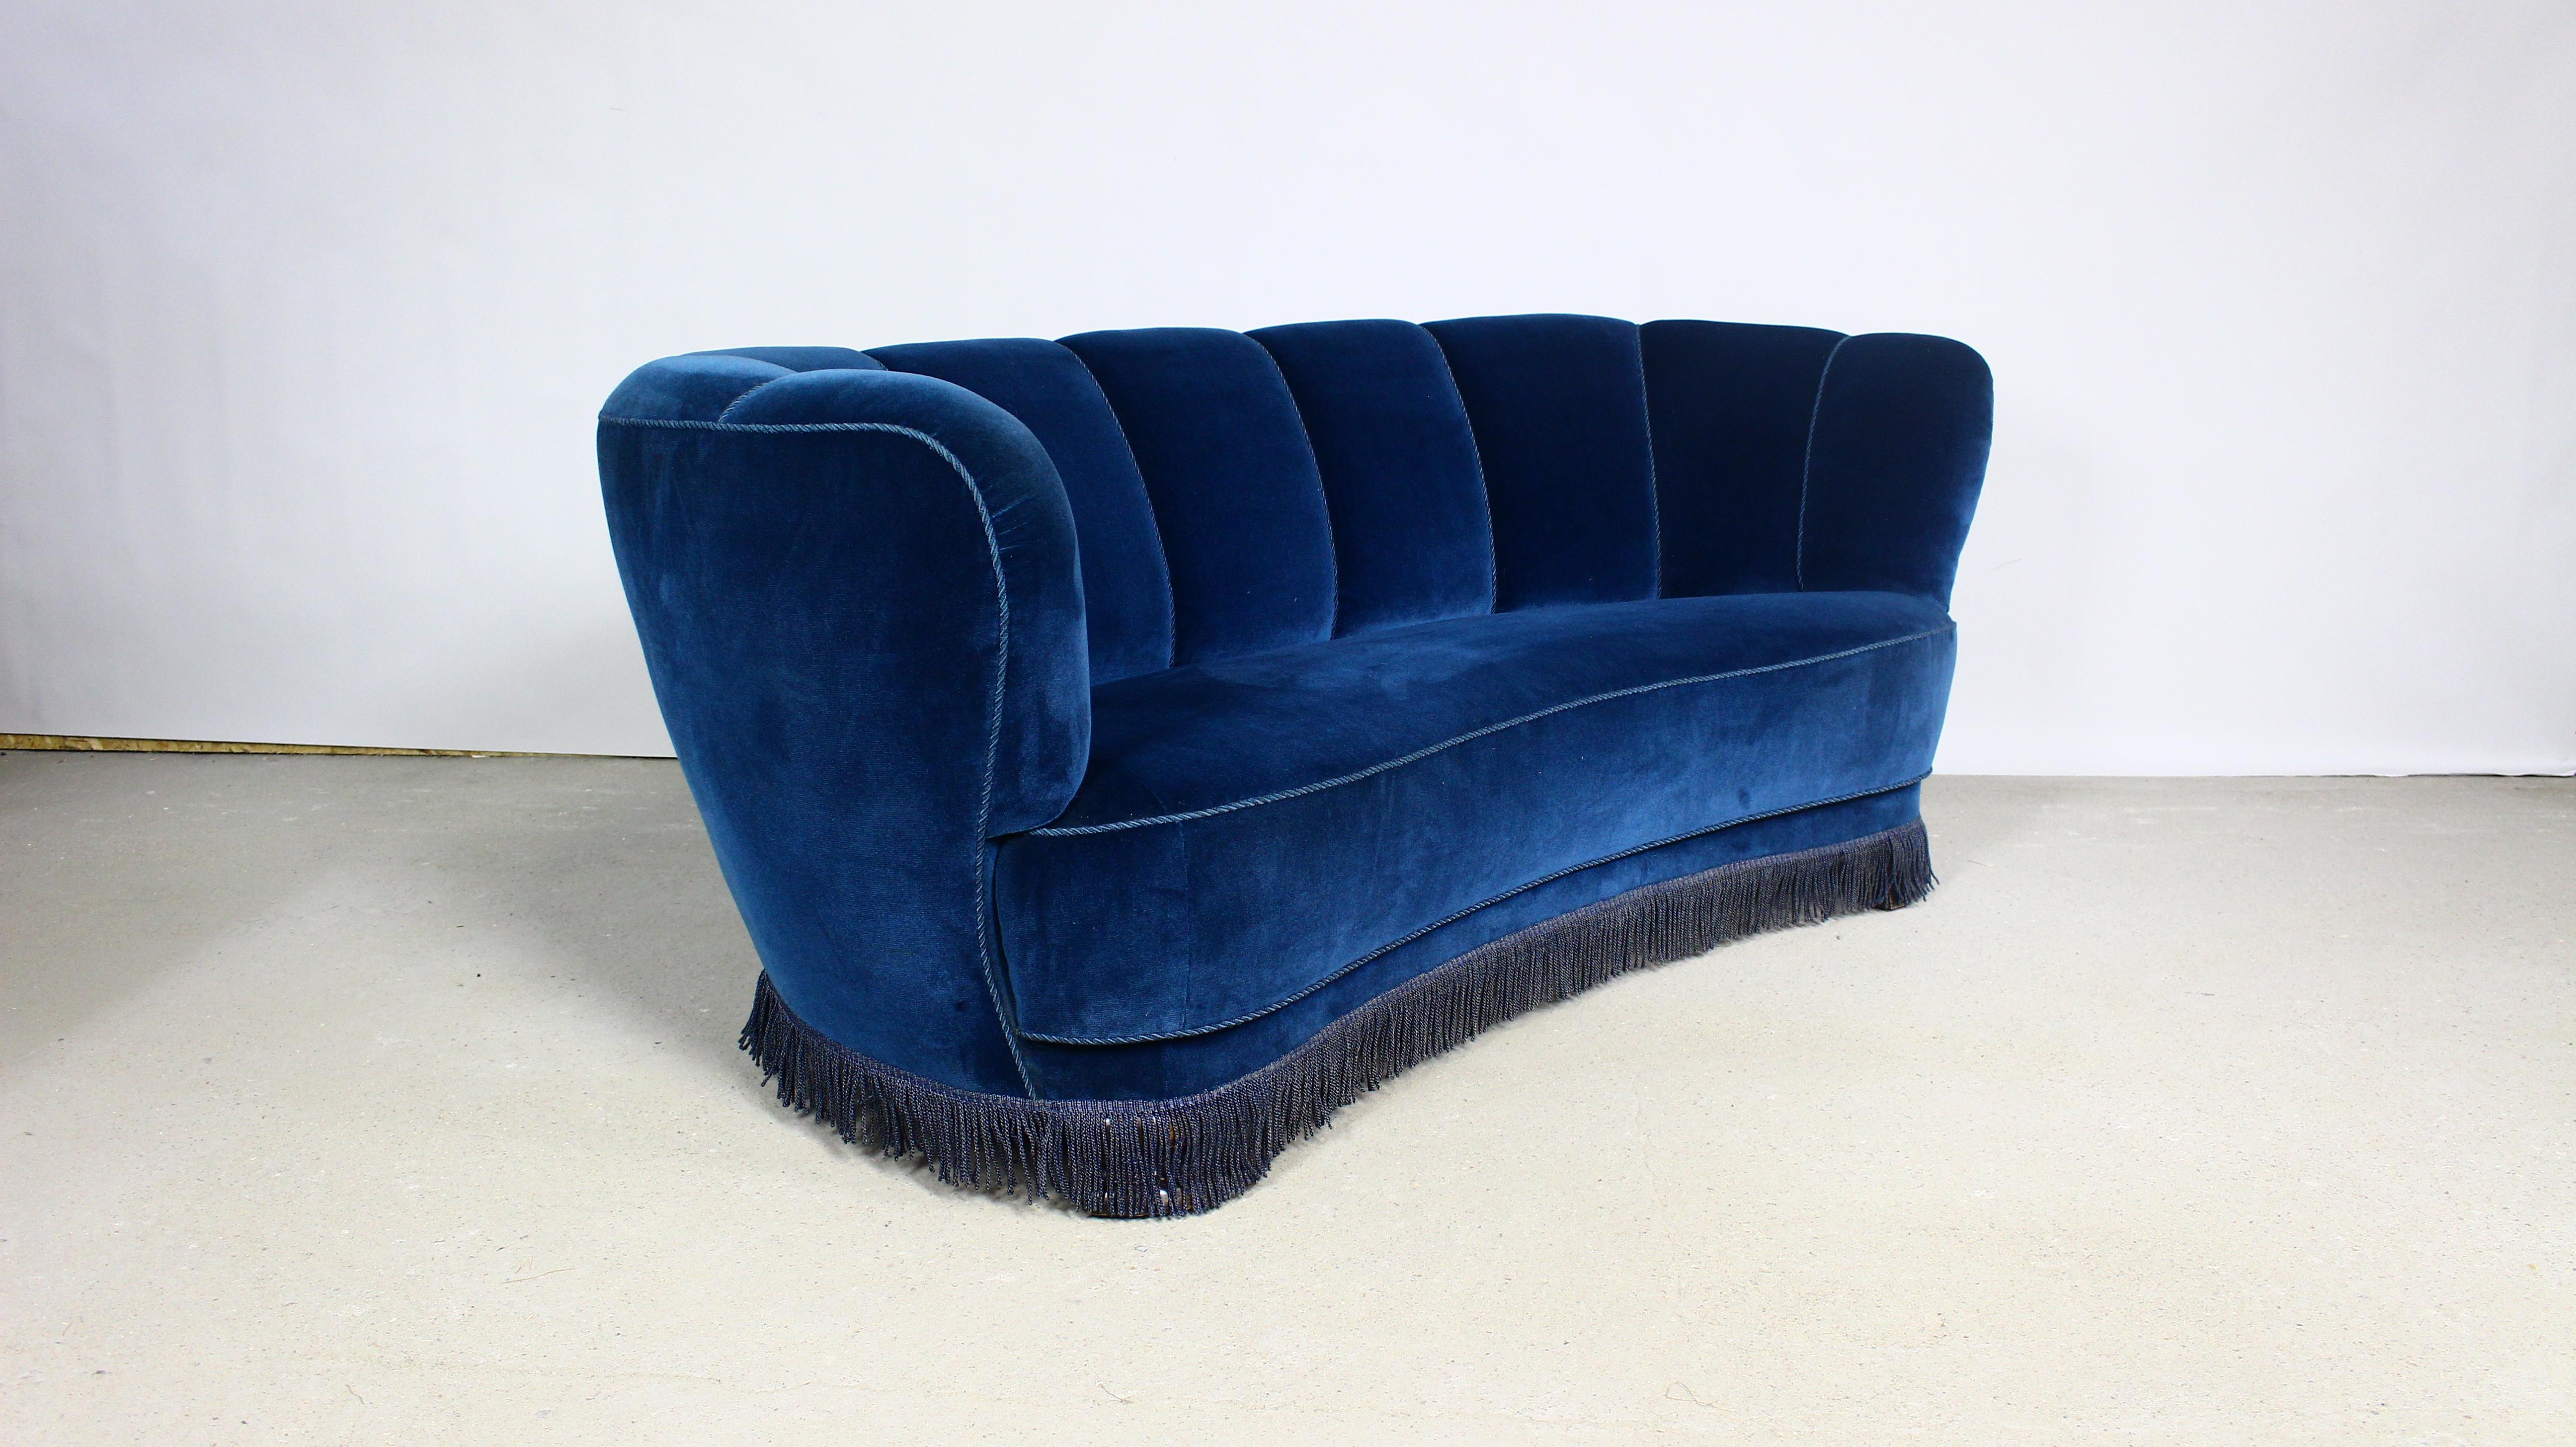 Danish Cabinetmaker Banana Curved Sofa, 1940s.
Banana shaped curved sofa in blue velvet, made in Denmark.
Made in the mid-century modern era.
Very good vintage condition.
Ready for use.